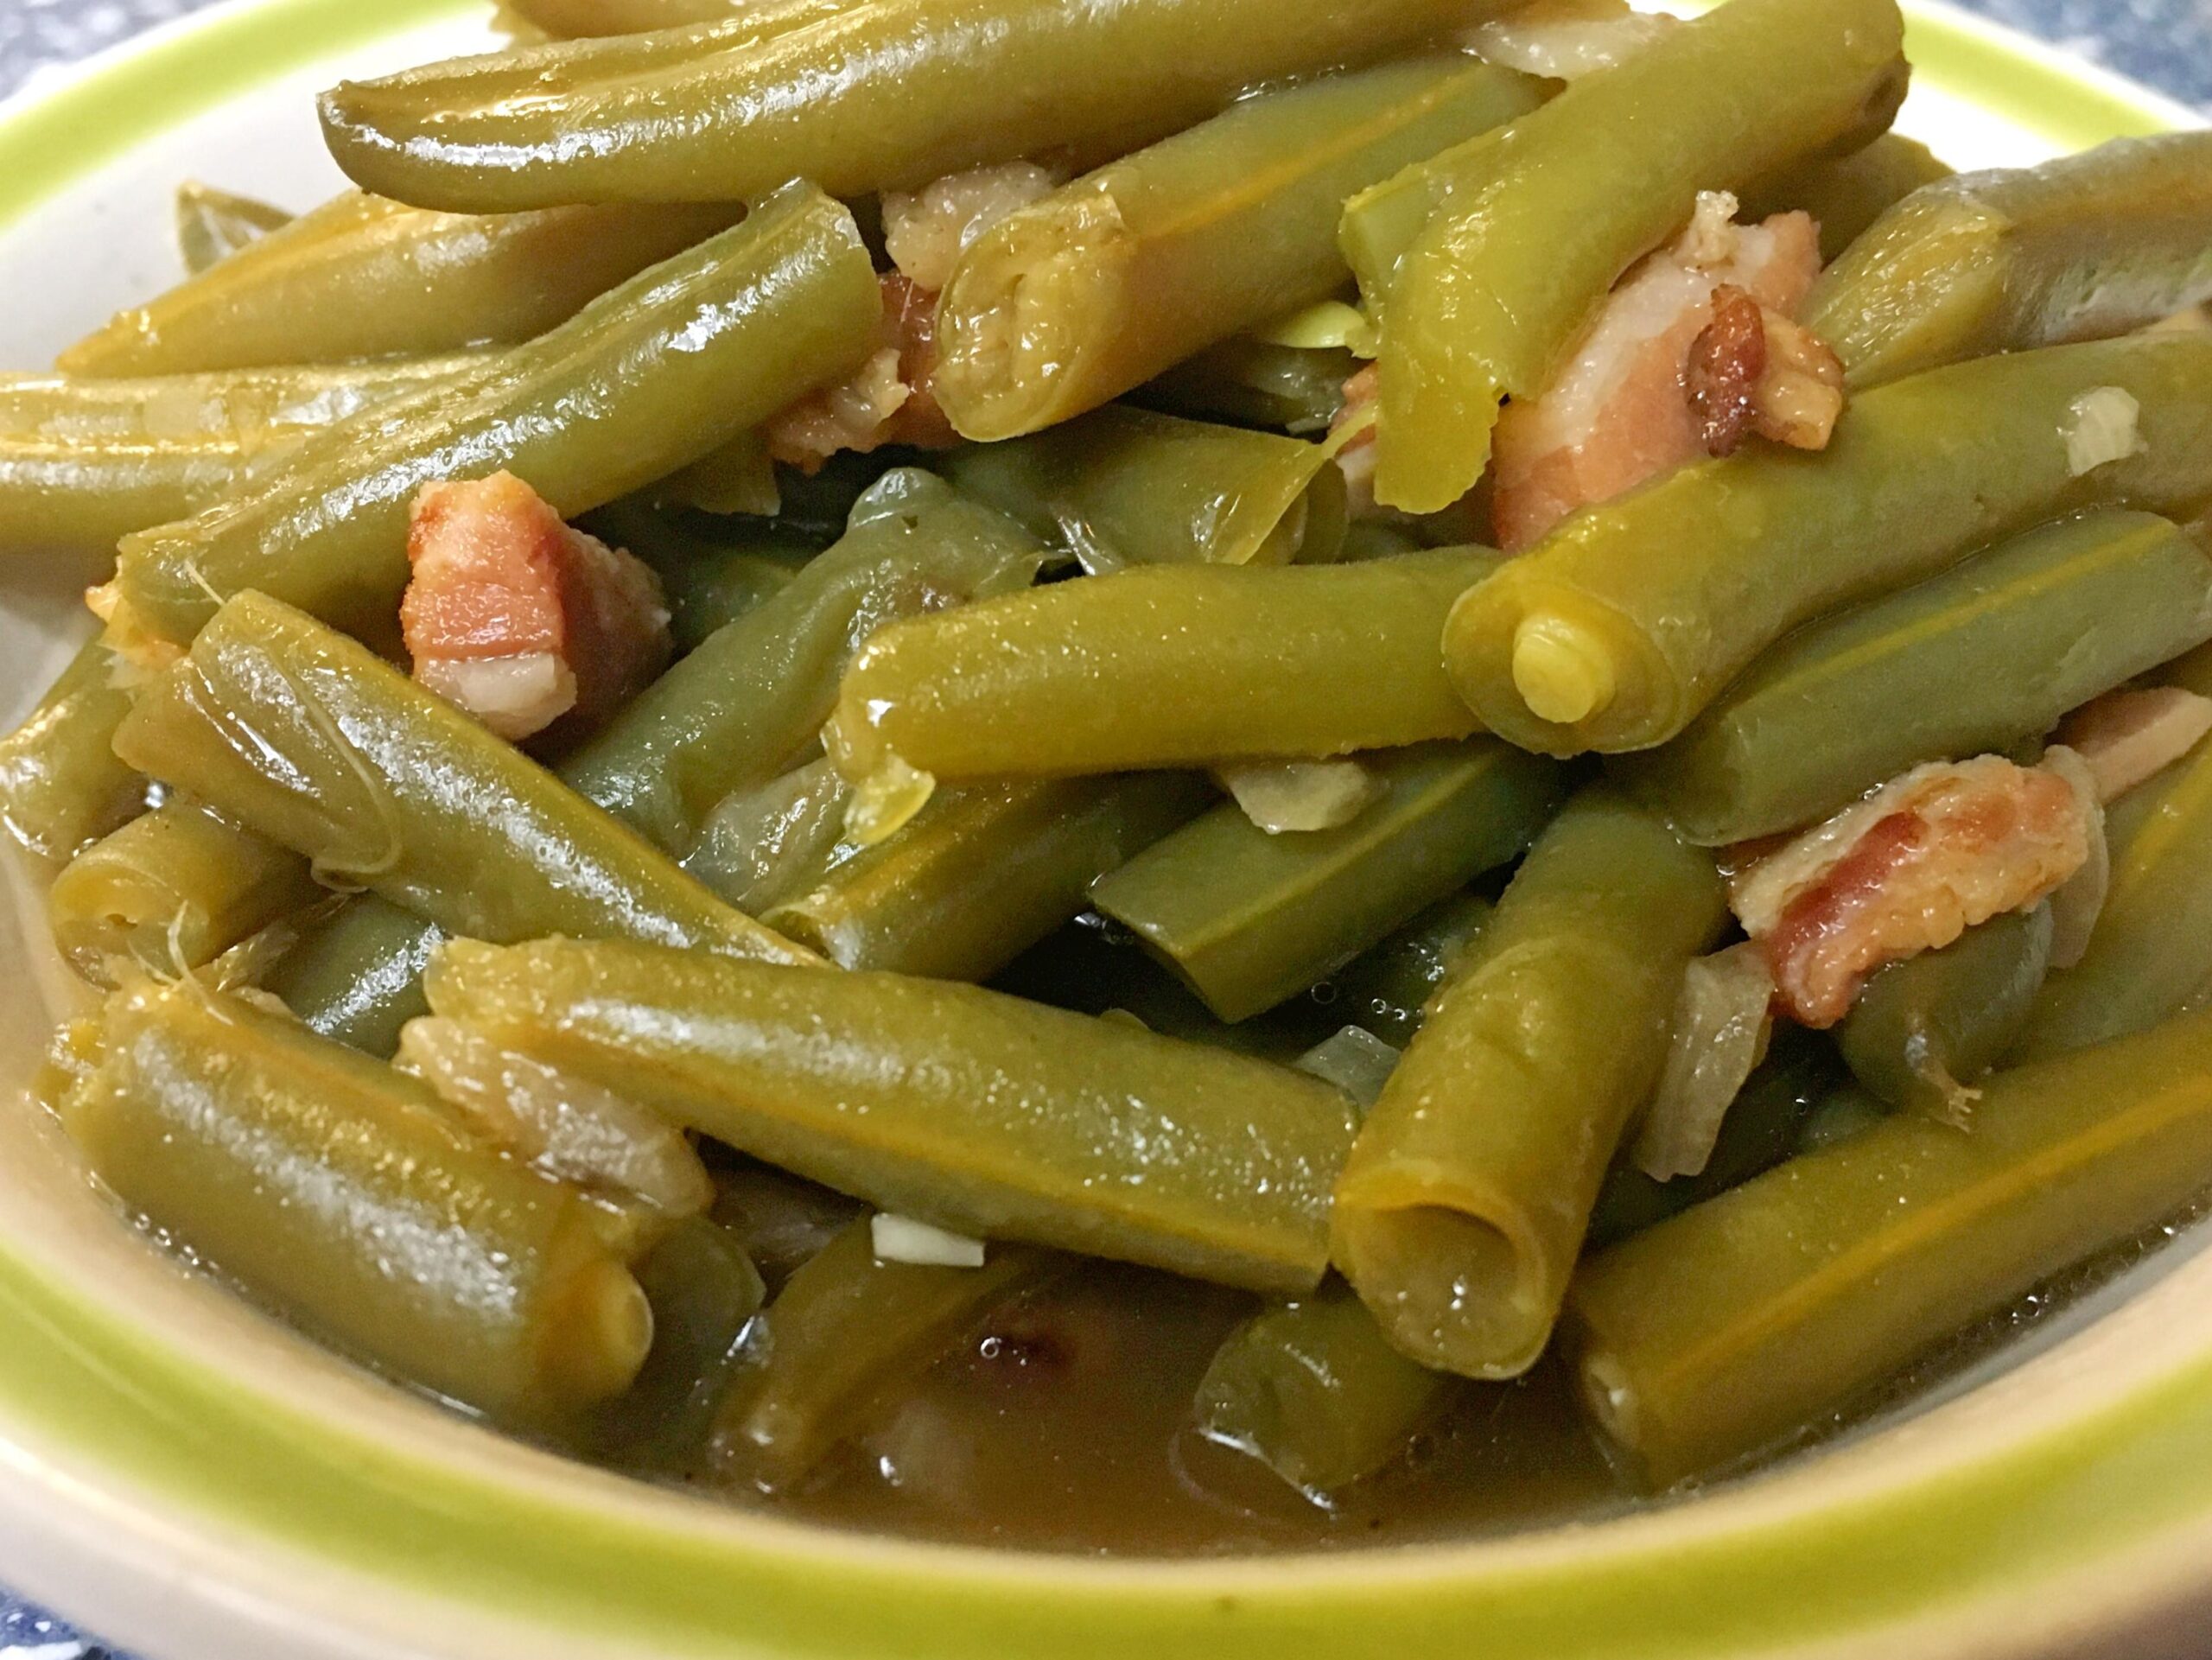  The combination of bacon and green beans is a match made in heaven.